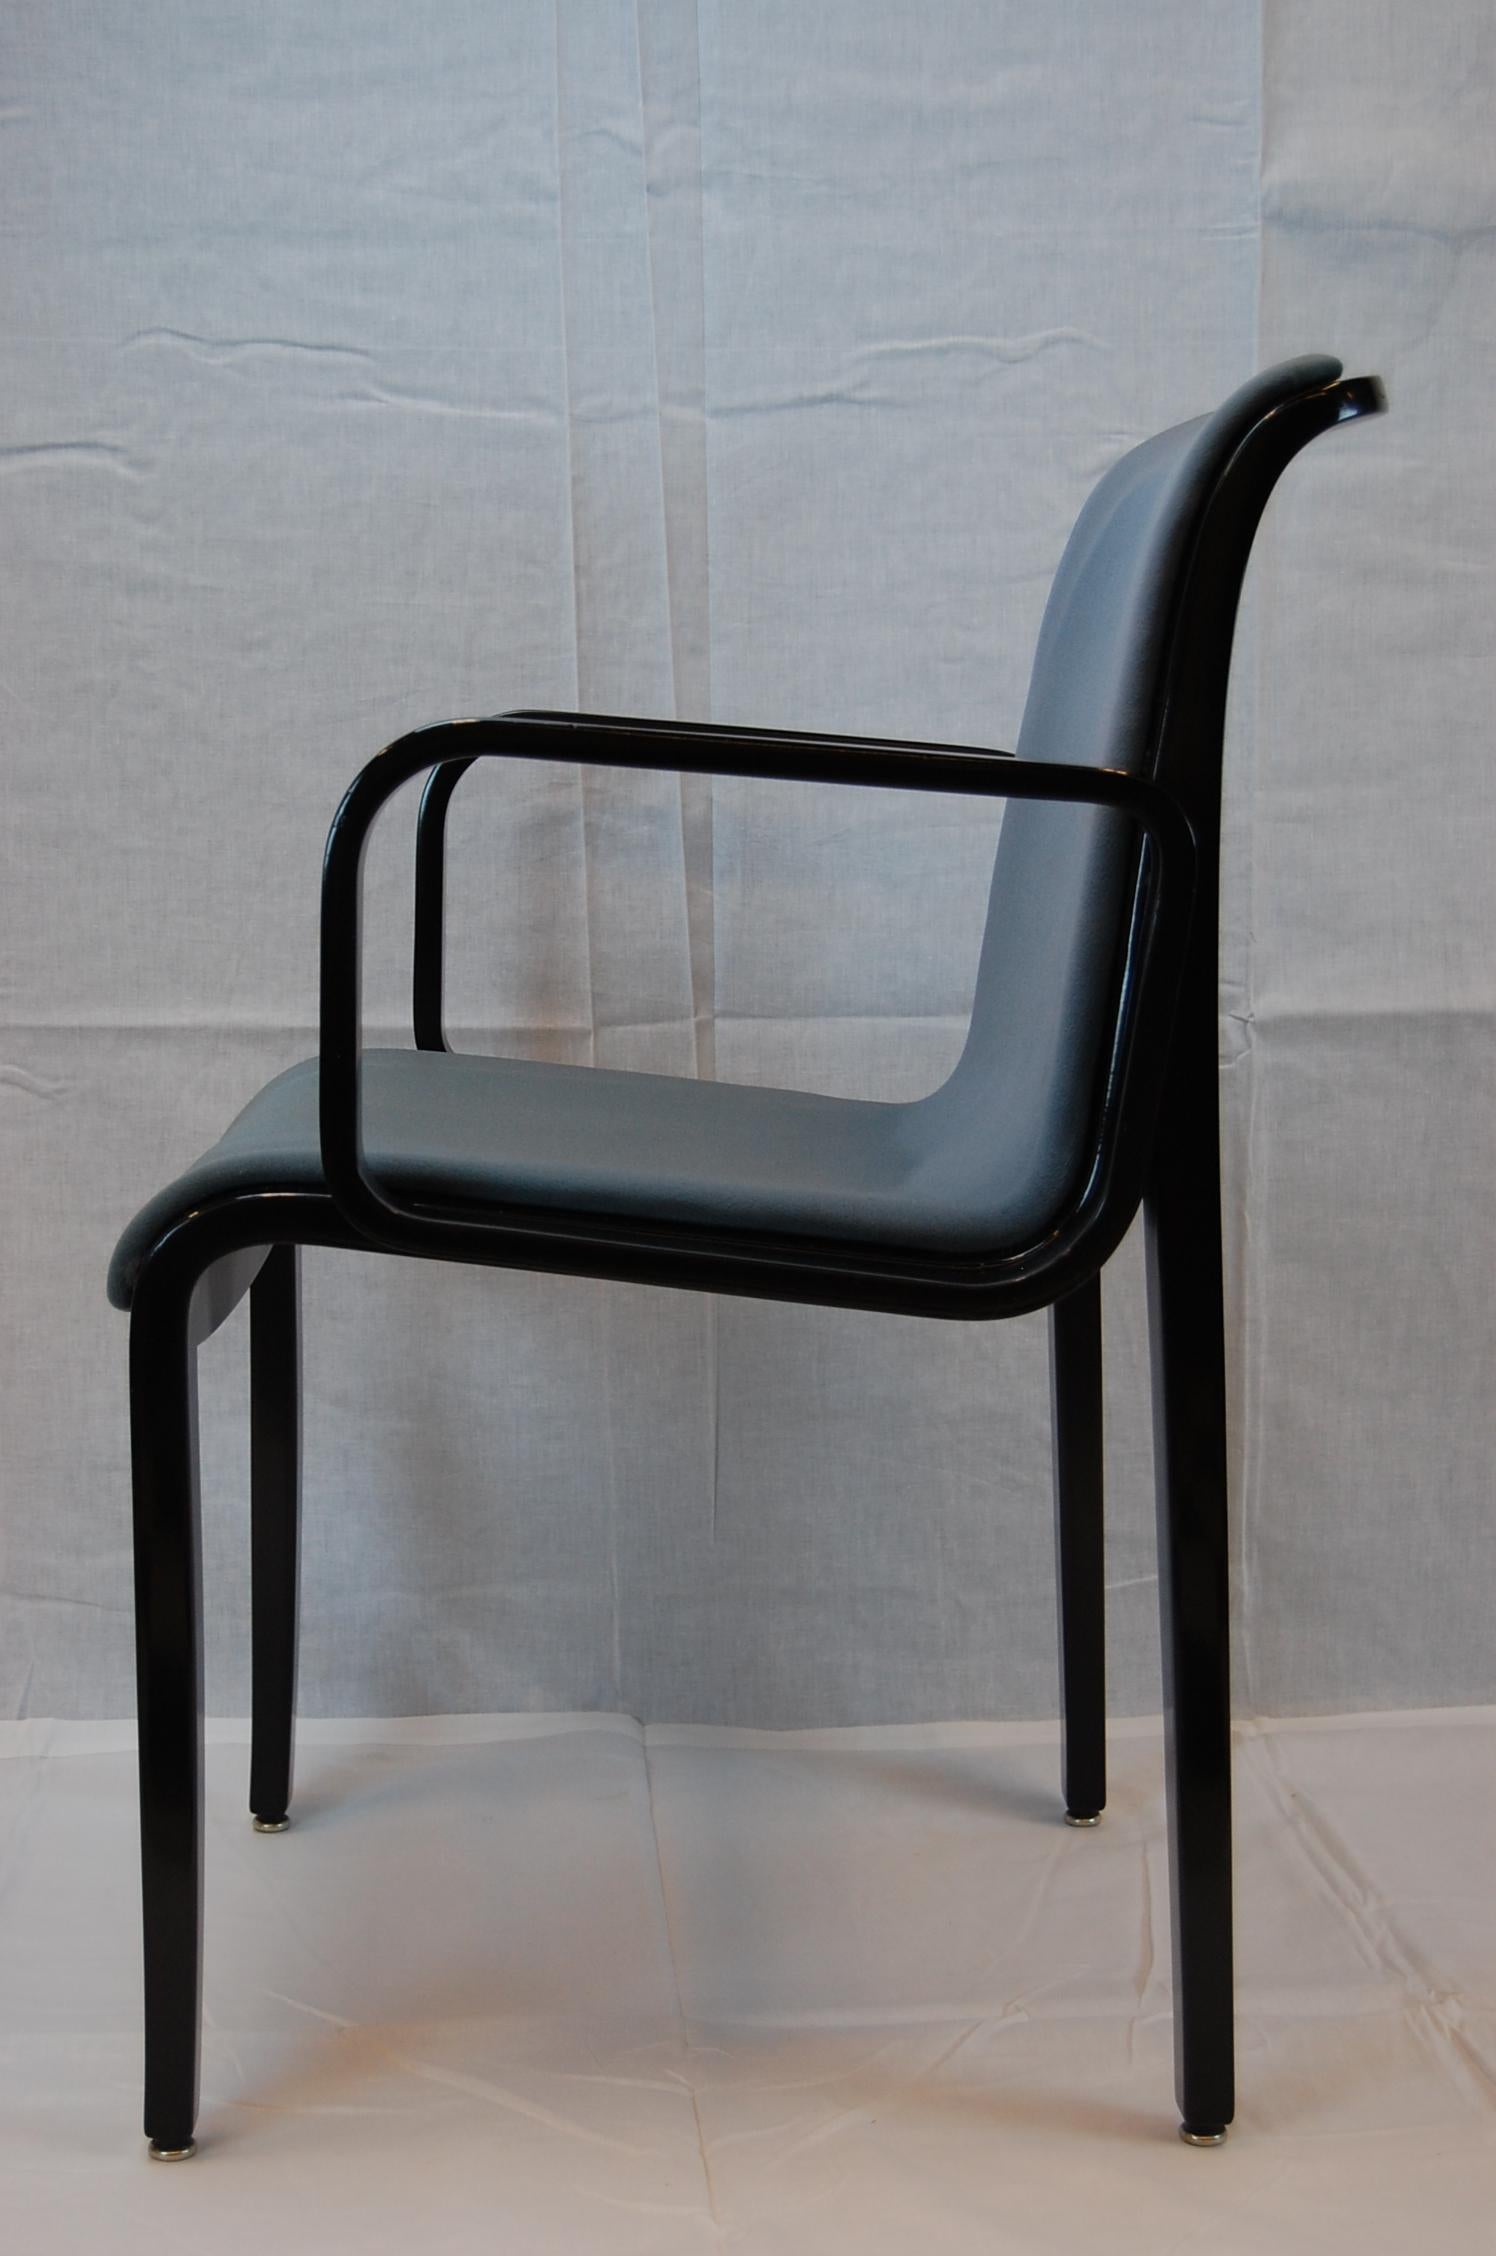 Modern Bill Stephens Black Lacquered Armchair for Knoll Furniture, Mid-1990s For Sale